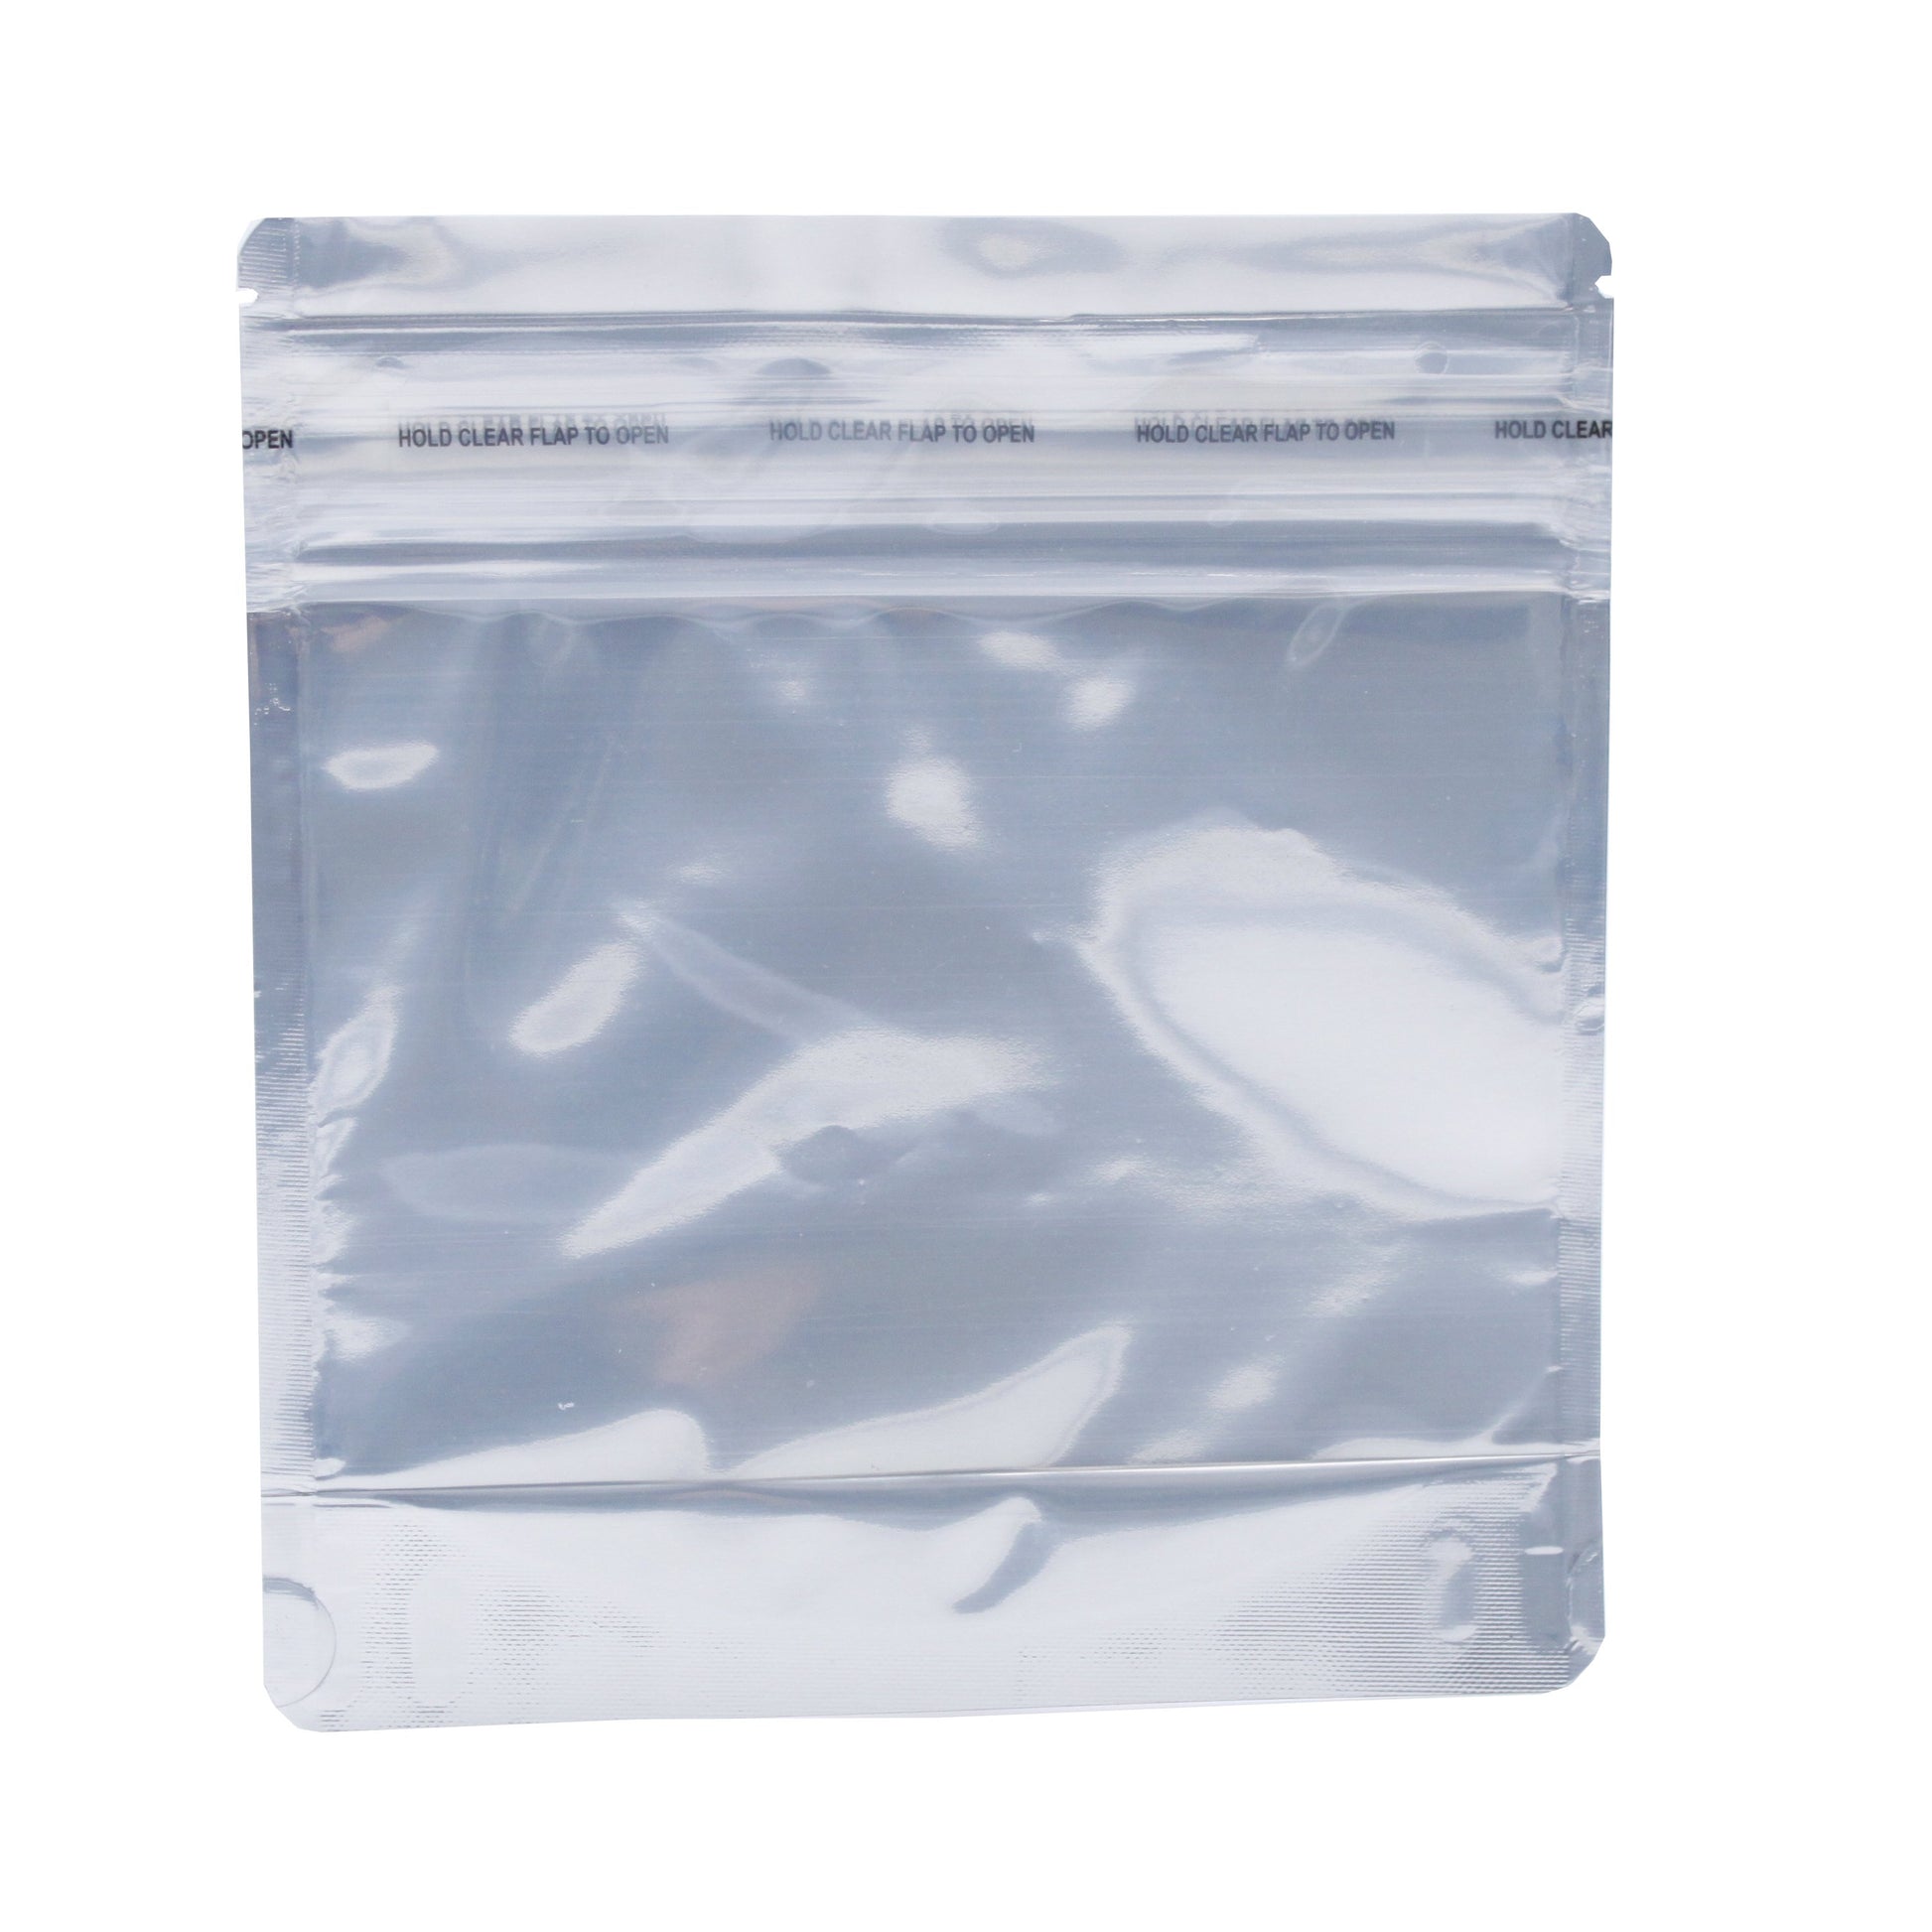 Bag King Child-Resistant Clear Front Wide Mouth Bag (1/2 oz) 6.2" x 6.9"